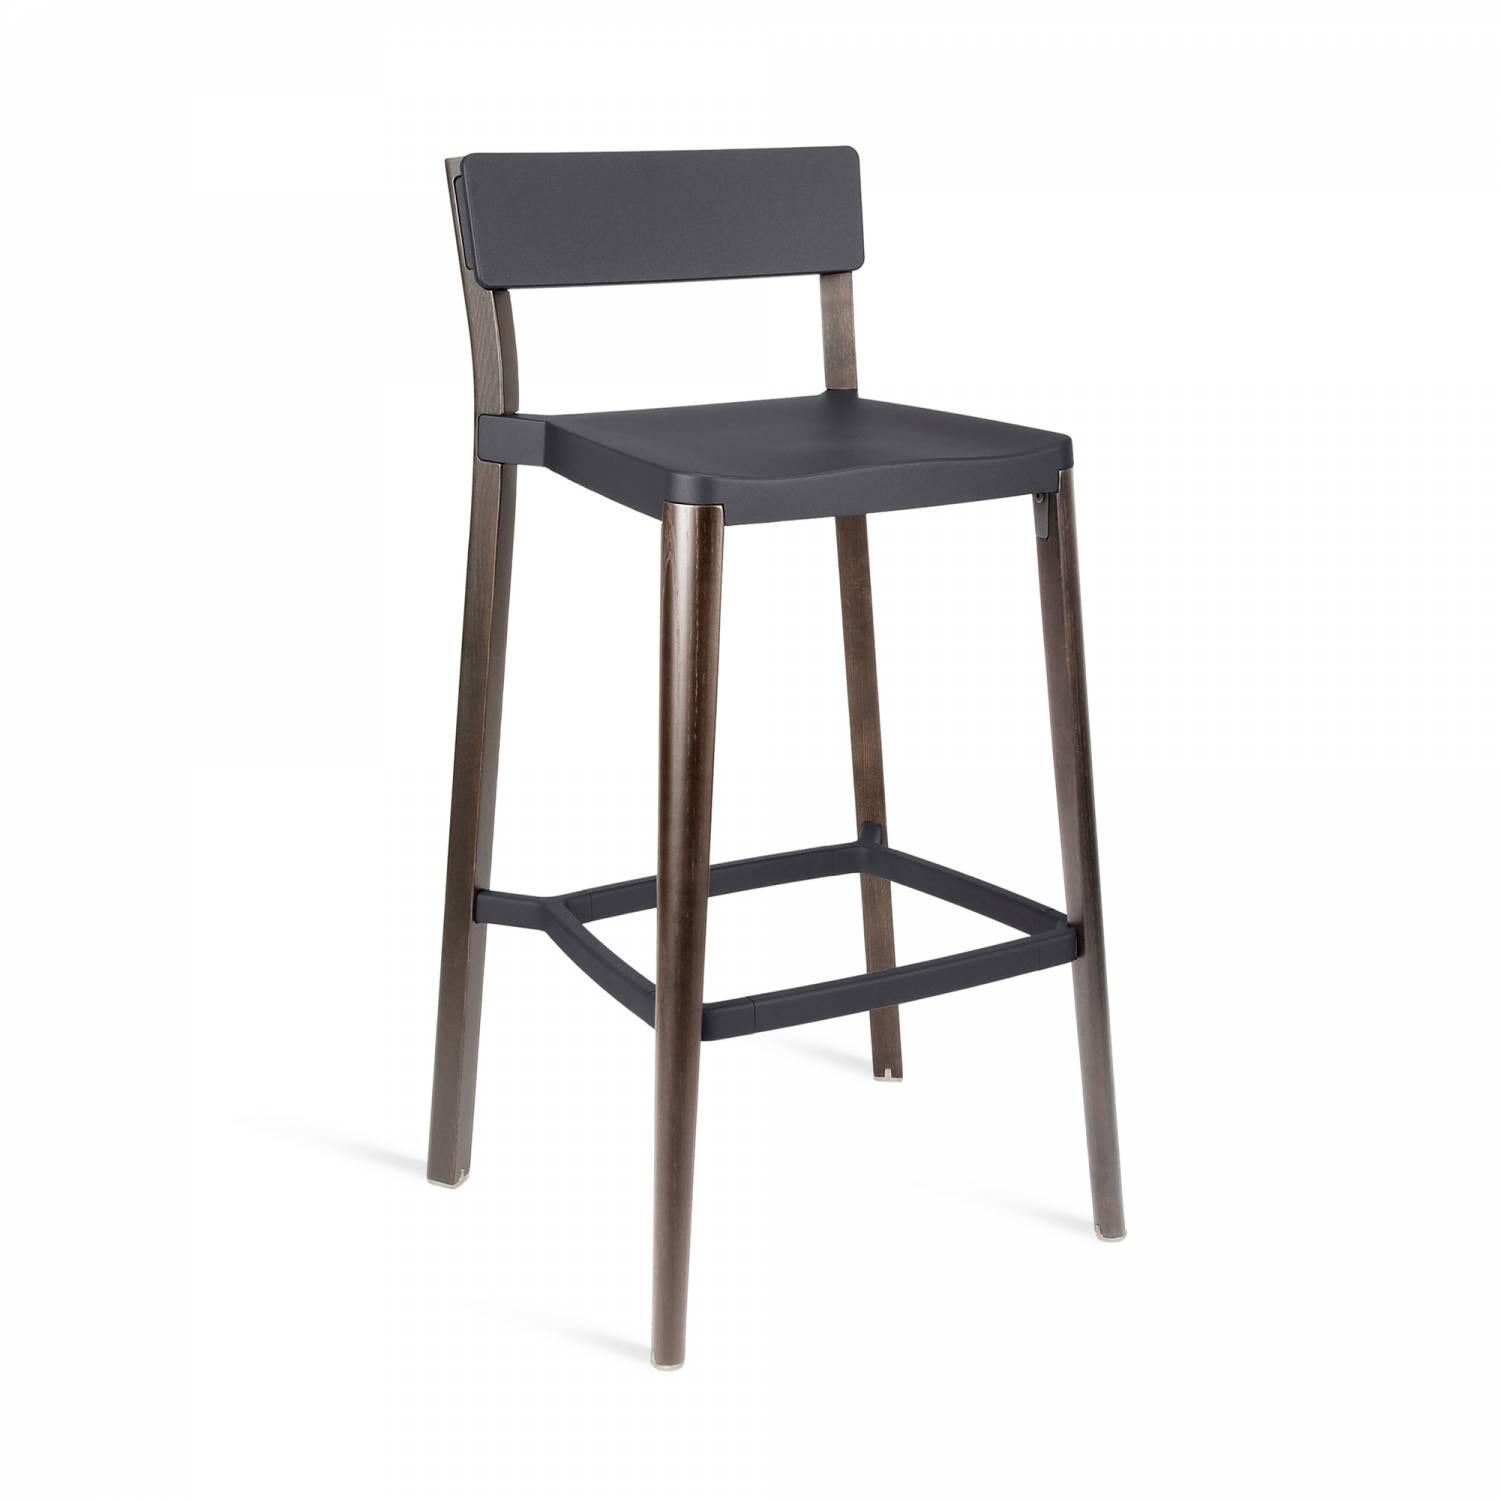 Our clients have asked us to utilize wood in our designs for years. Lancaster features a reclaimed, solid ash frame and recycled die-cast aluminum seat and back- an expression of Industrial technique and warm materials.

Made of: Recycled